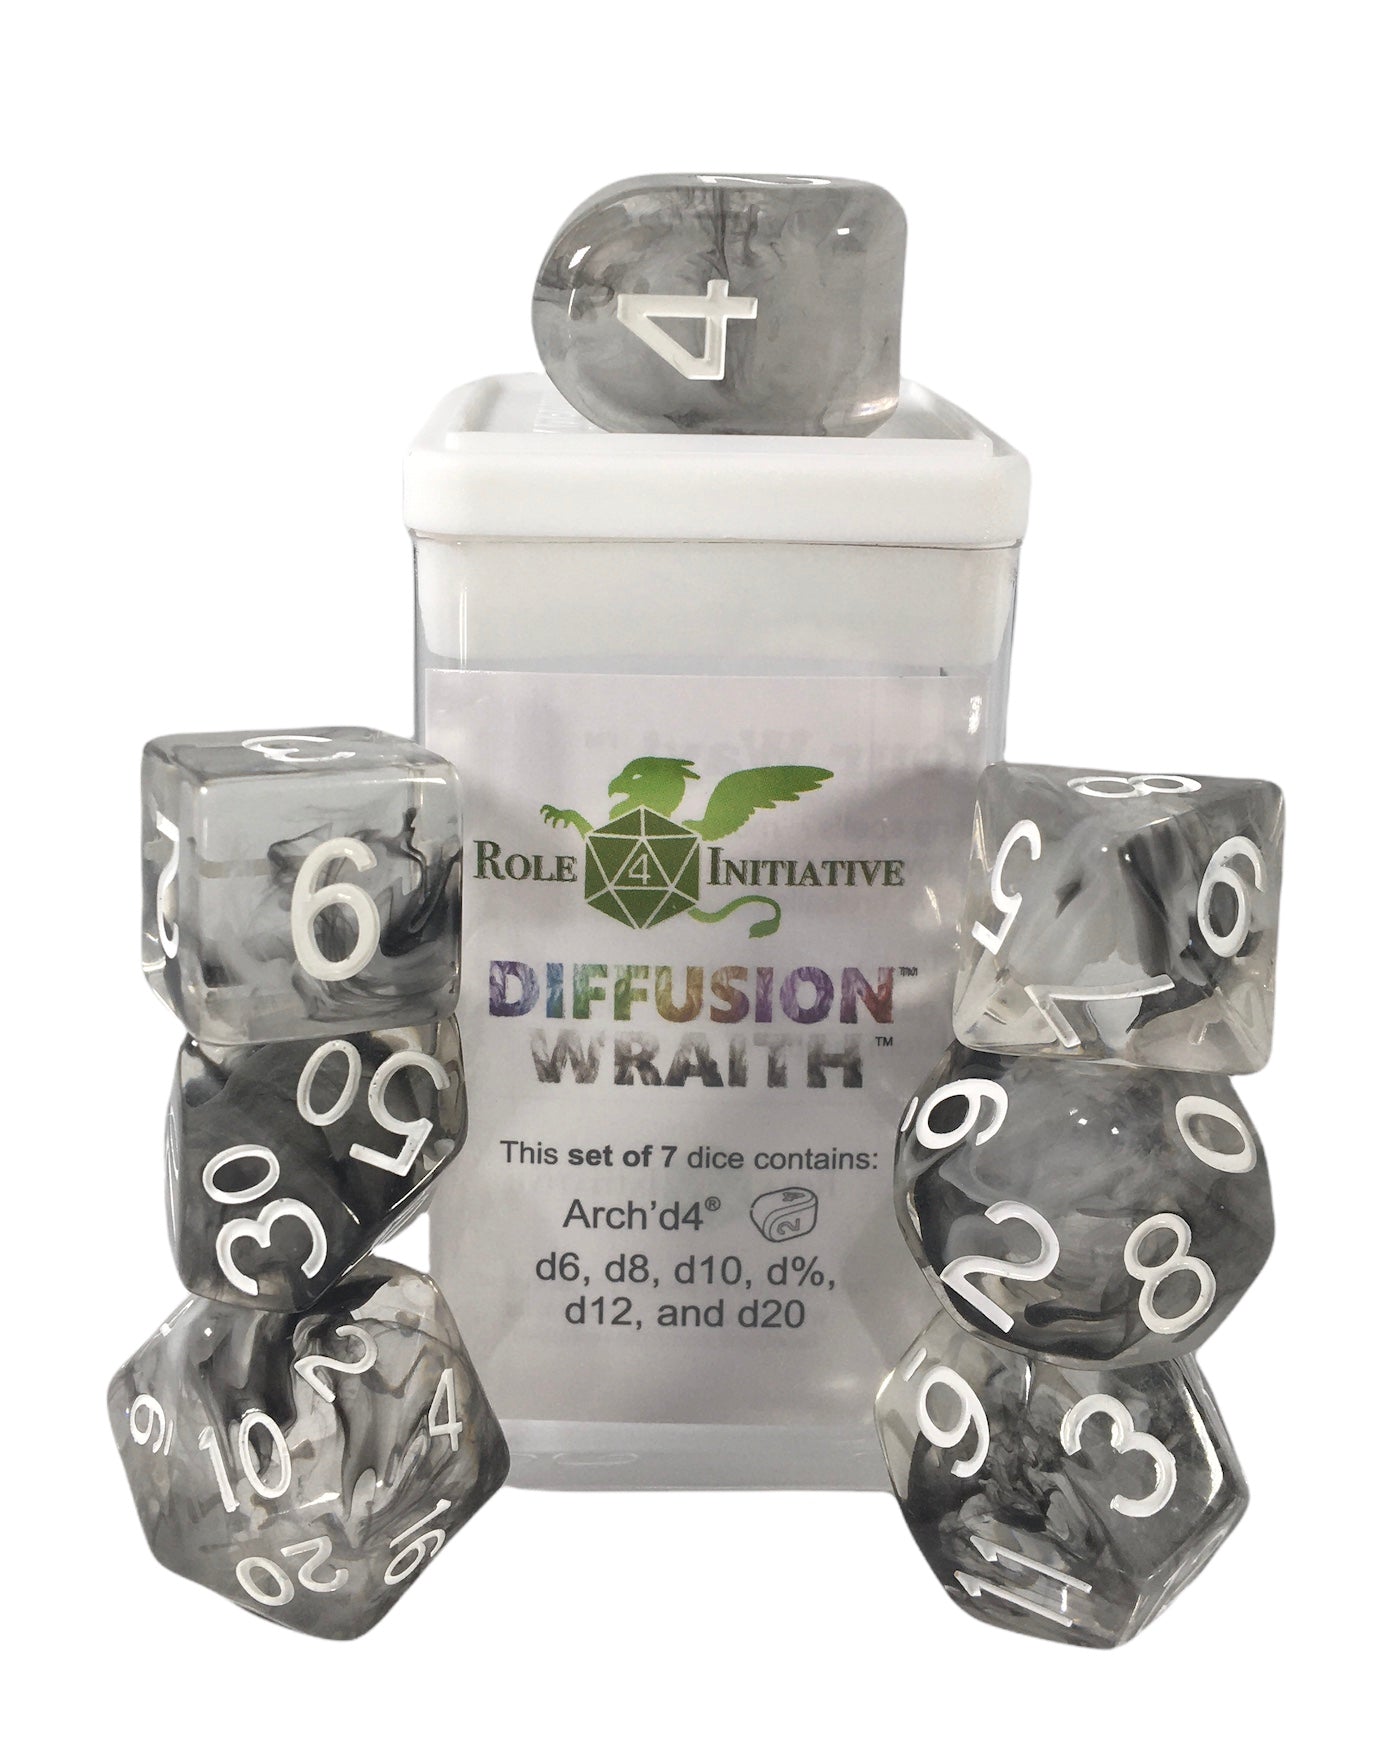 Dice Diffusion Wraith - Sets  Singles Set of 7 w/ Arch'd4 in box